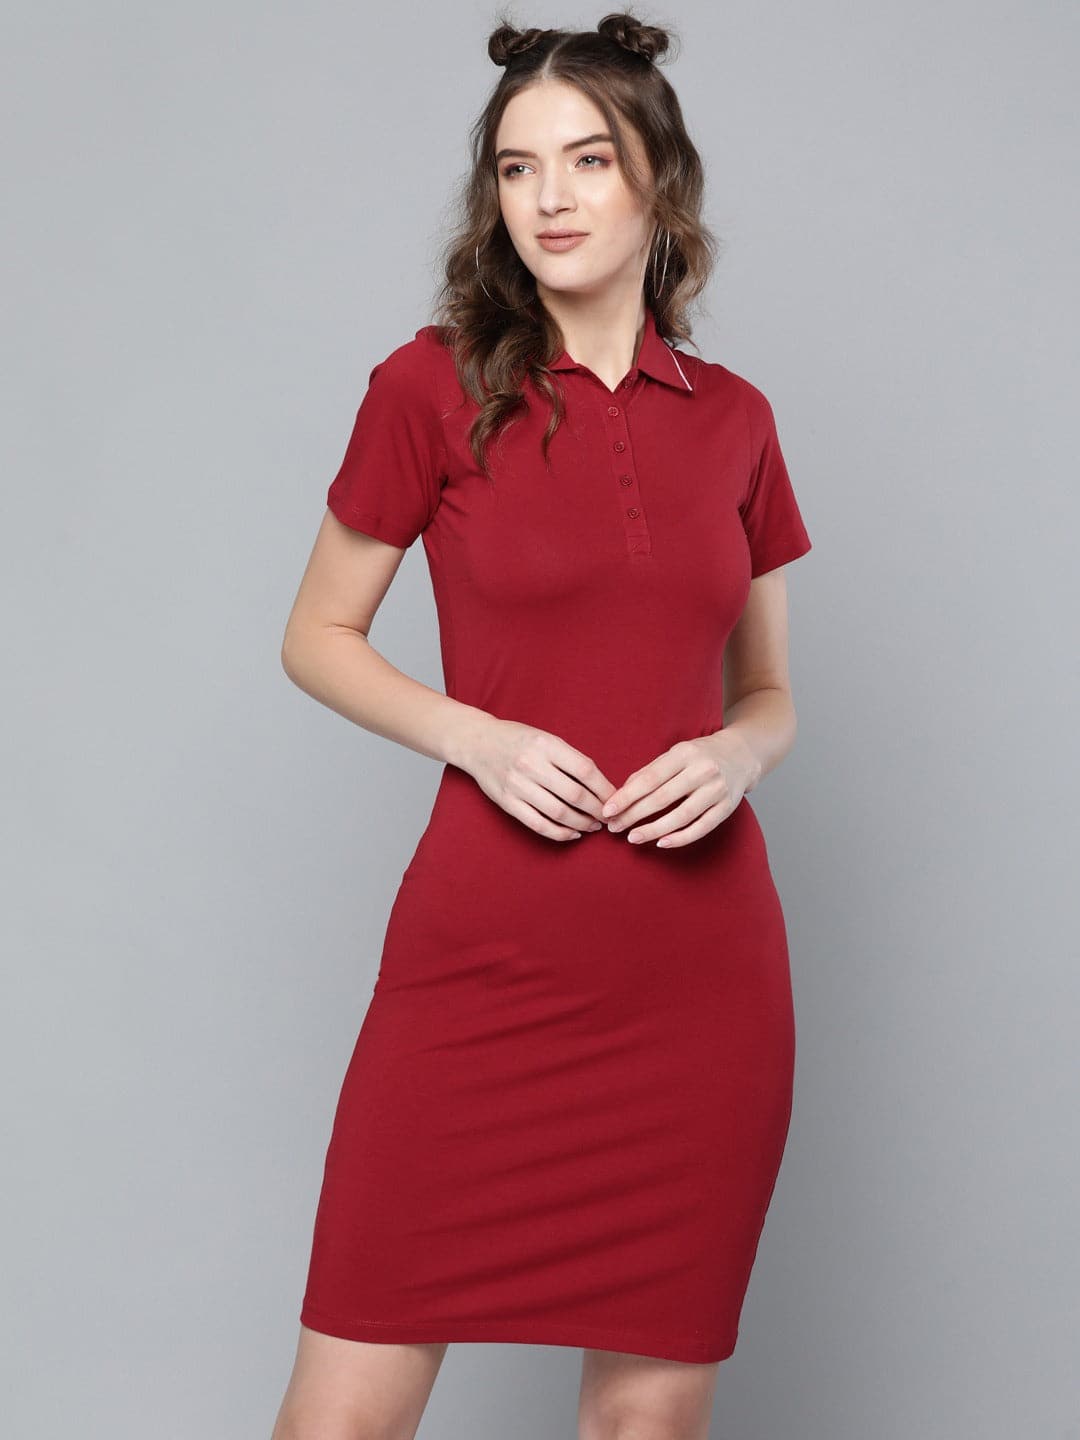 Buy Women Maroon Polo Neck T-Shirt Dress Online At Best Price